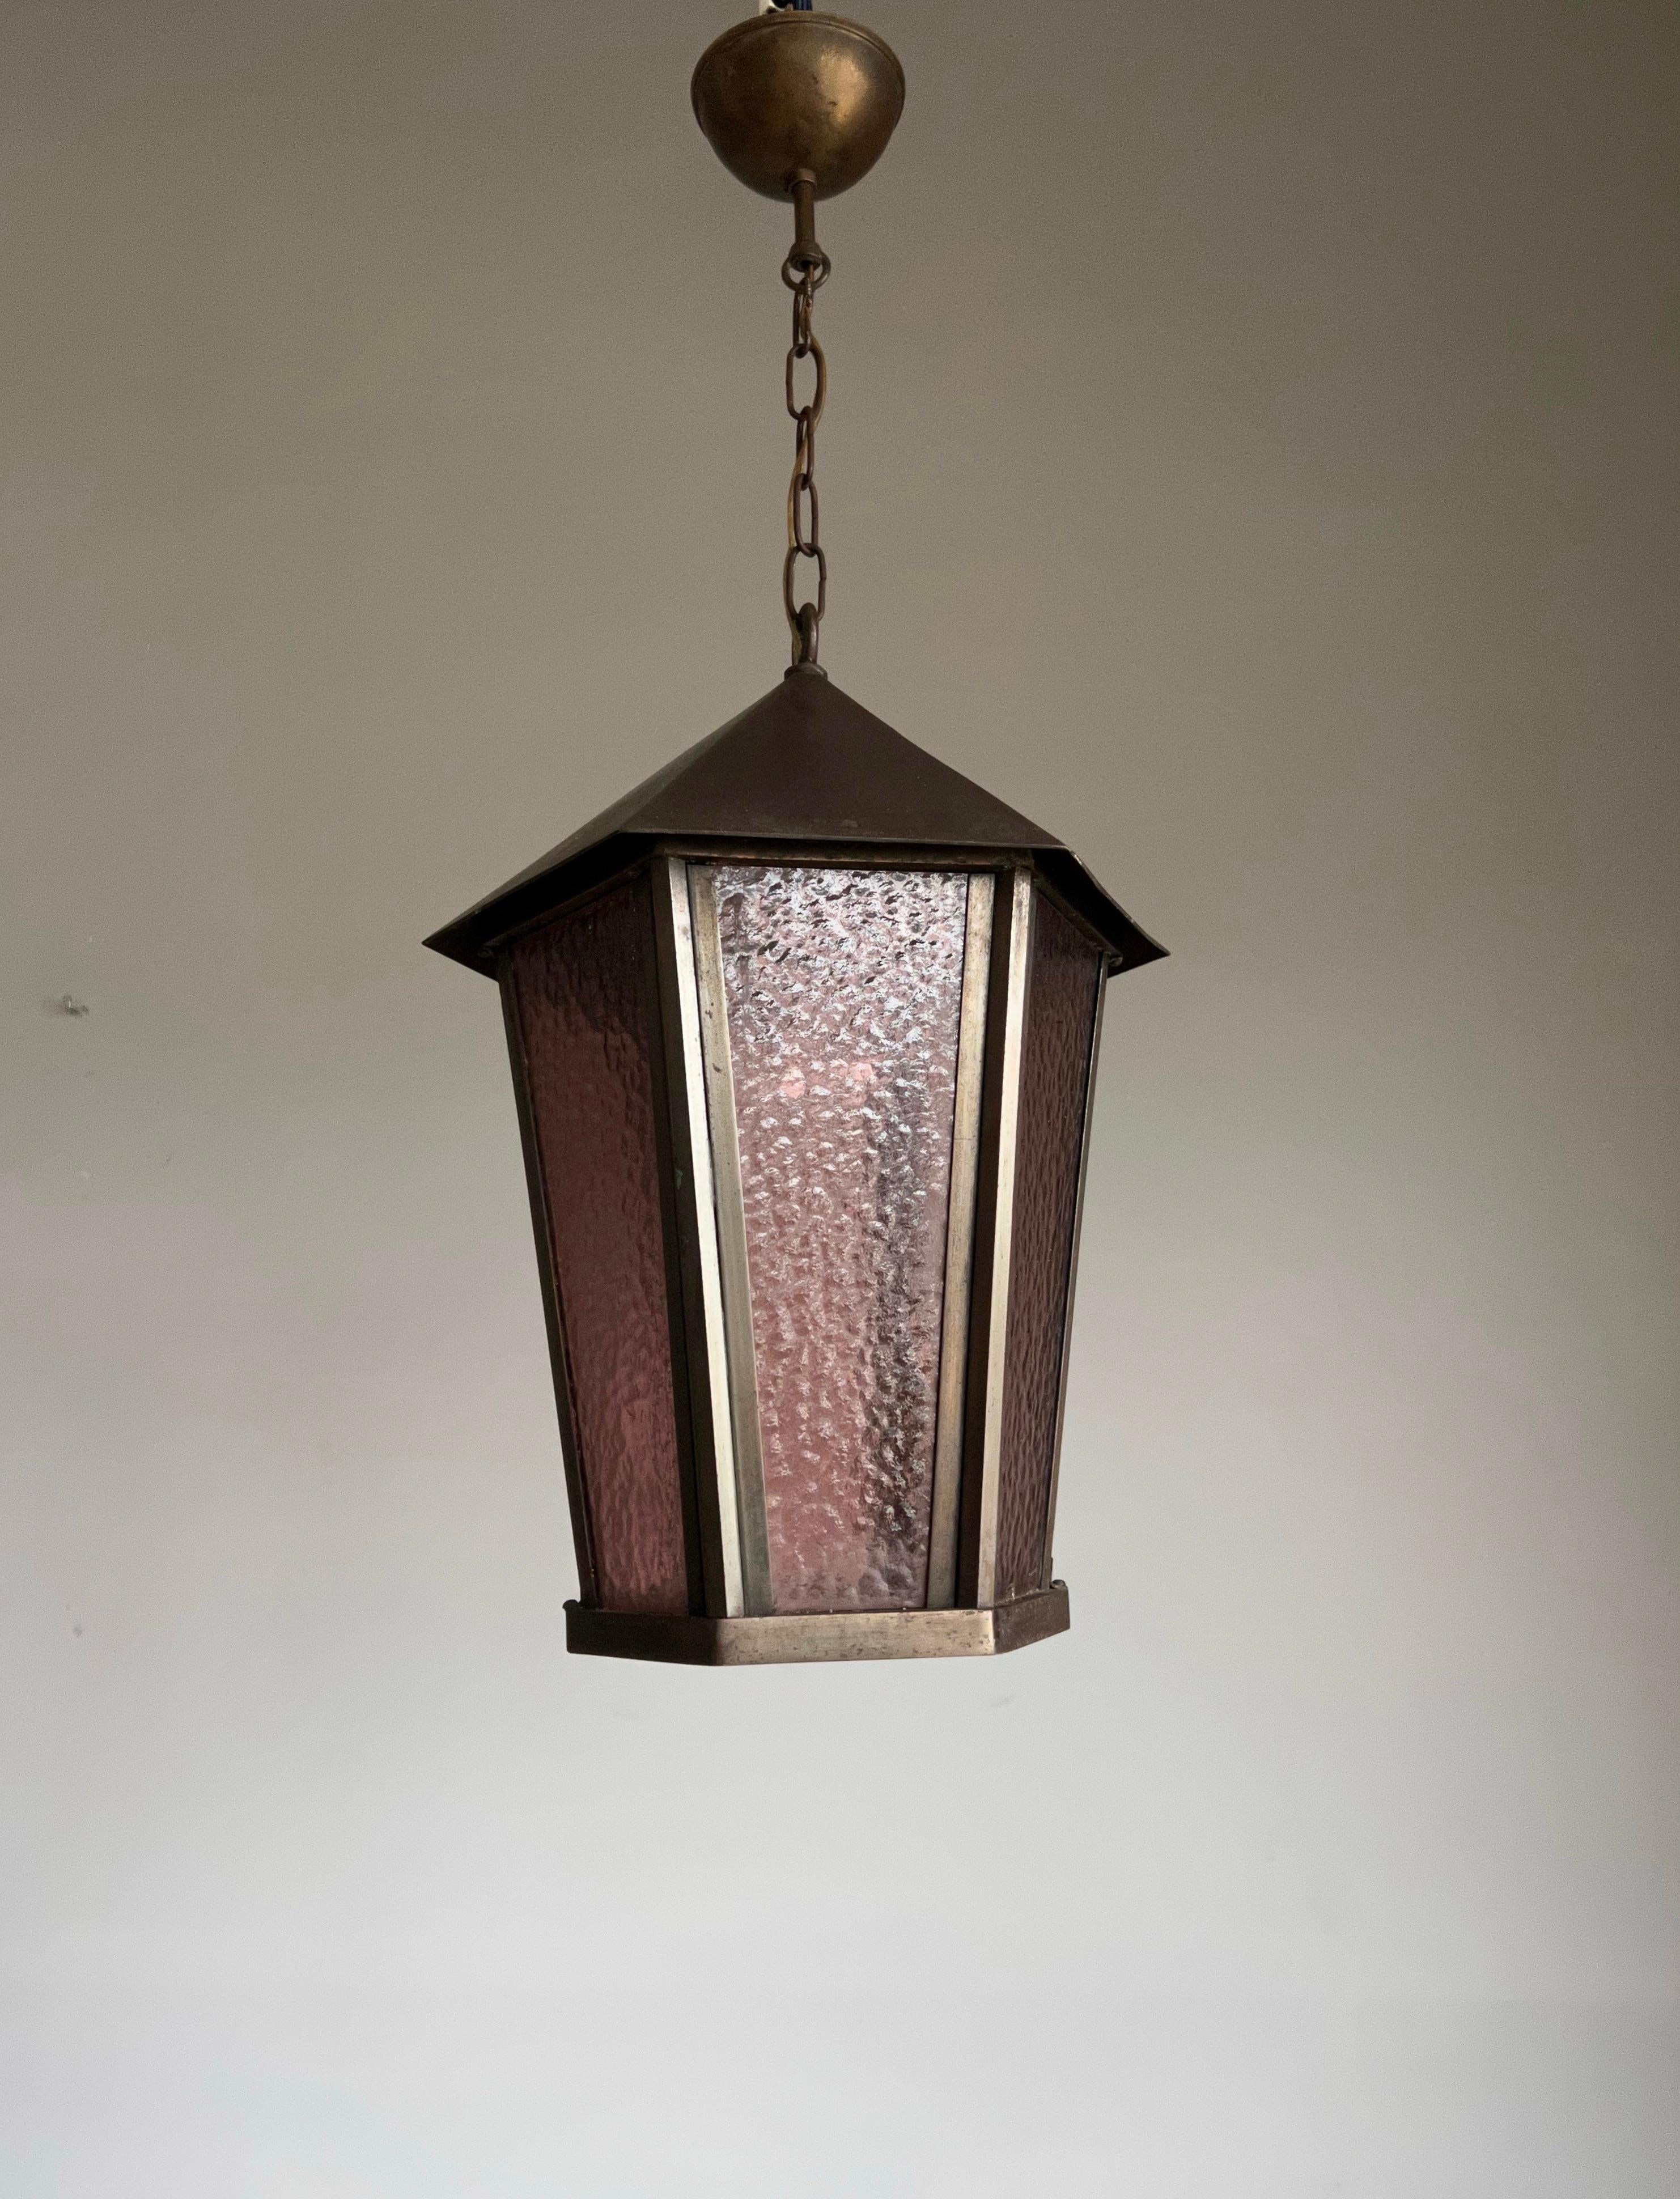 Unique and all handcrafted, hexagonal light fixture with purple color cathedral glass. 

If you are looking for a stylish and quality crafted light to grace your entry hall or landing then this Arts & Crafts beauty could be perfect for you. It may